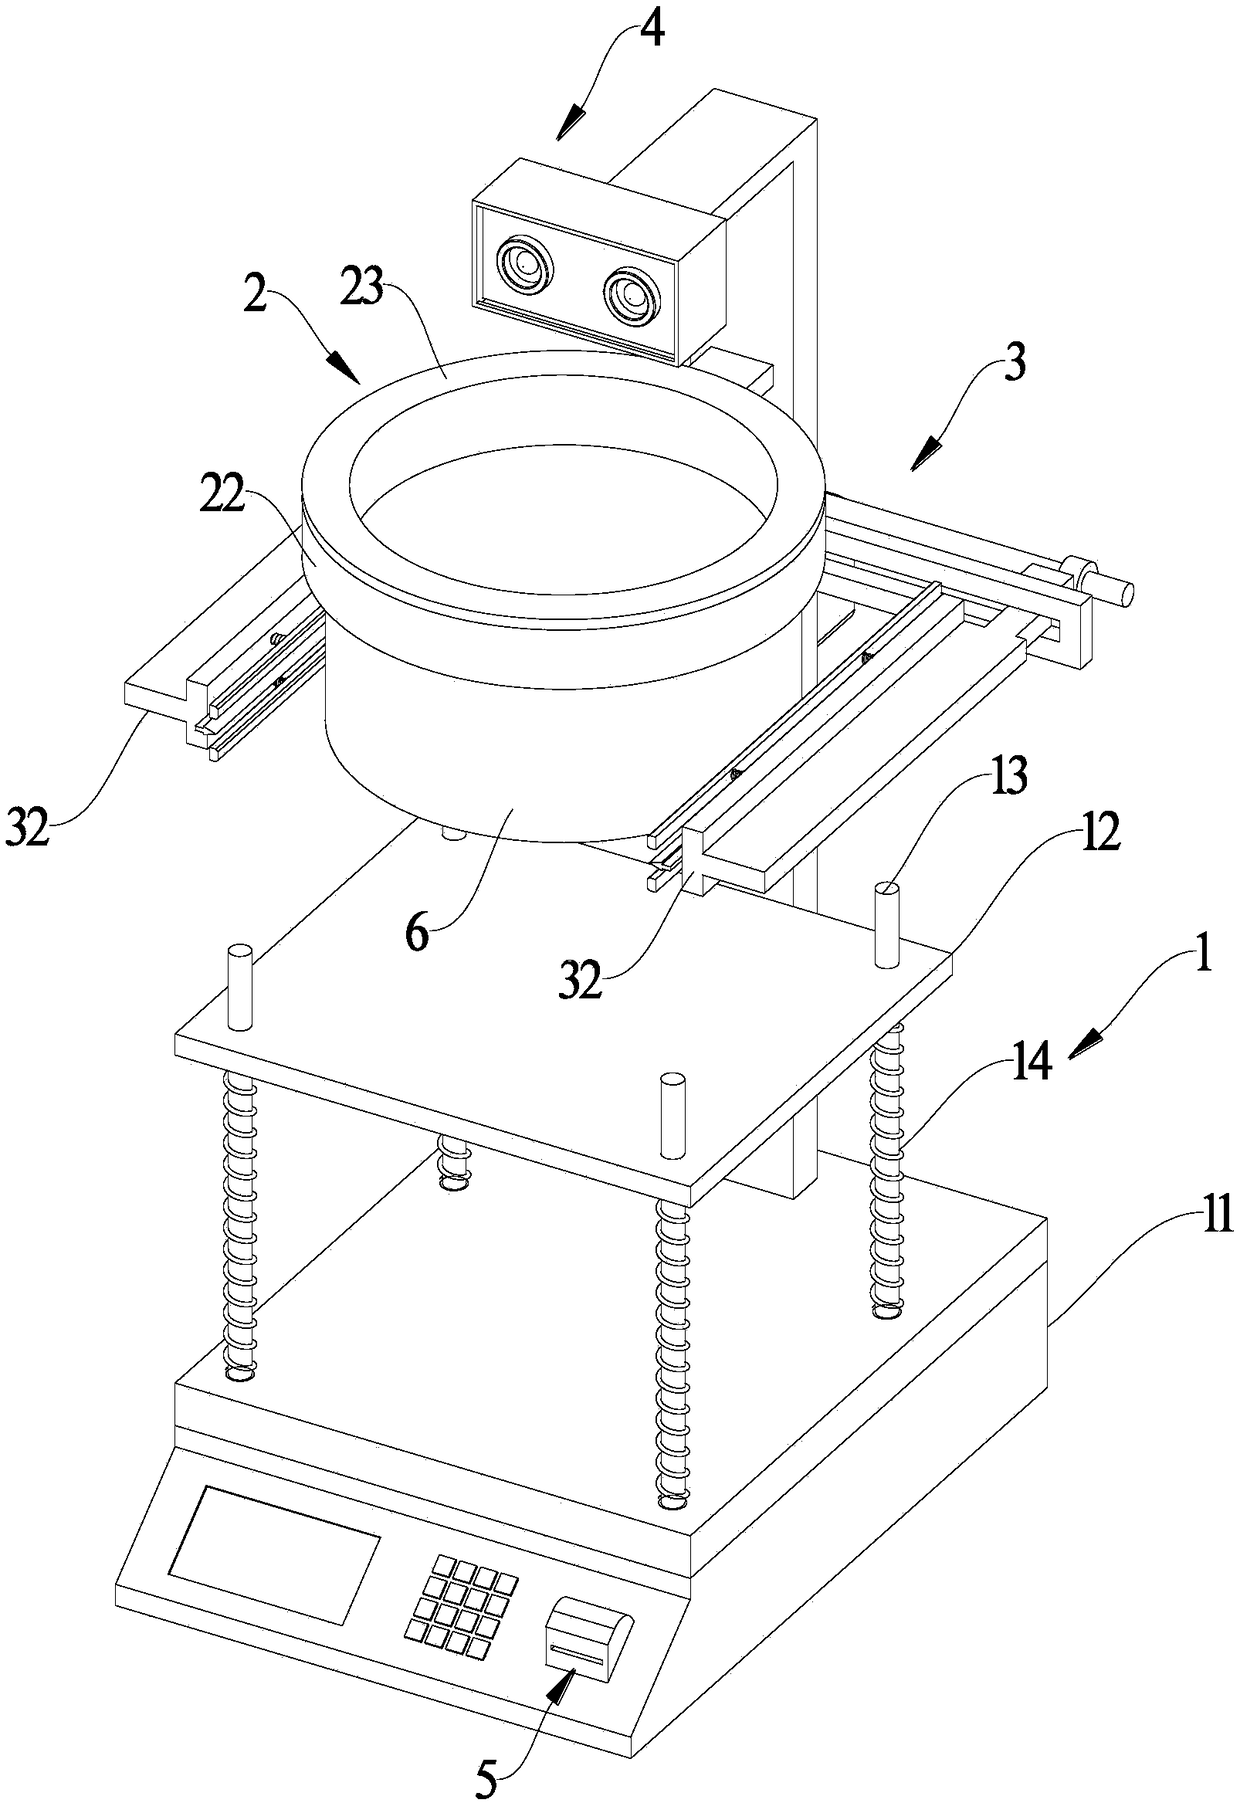 Self-weighing device